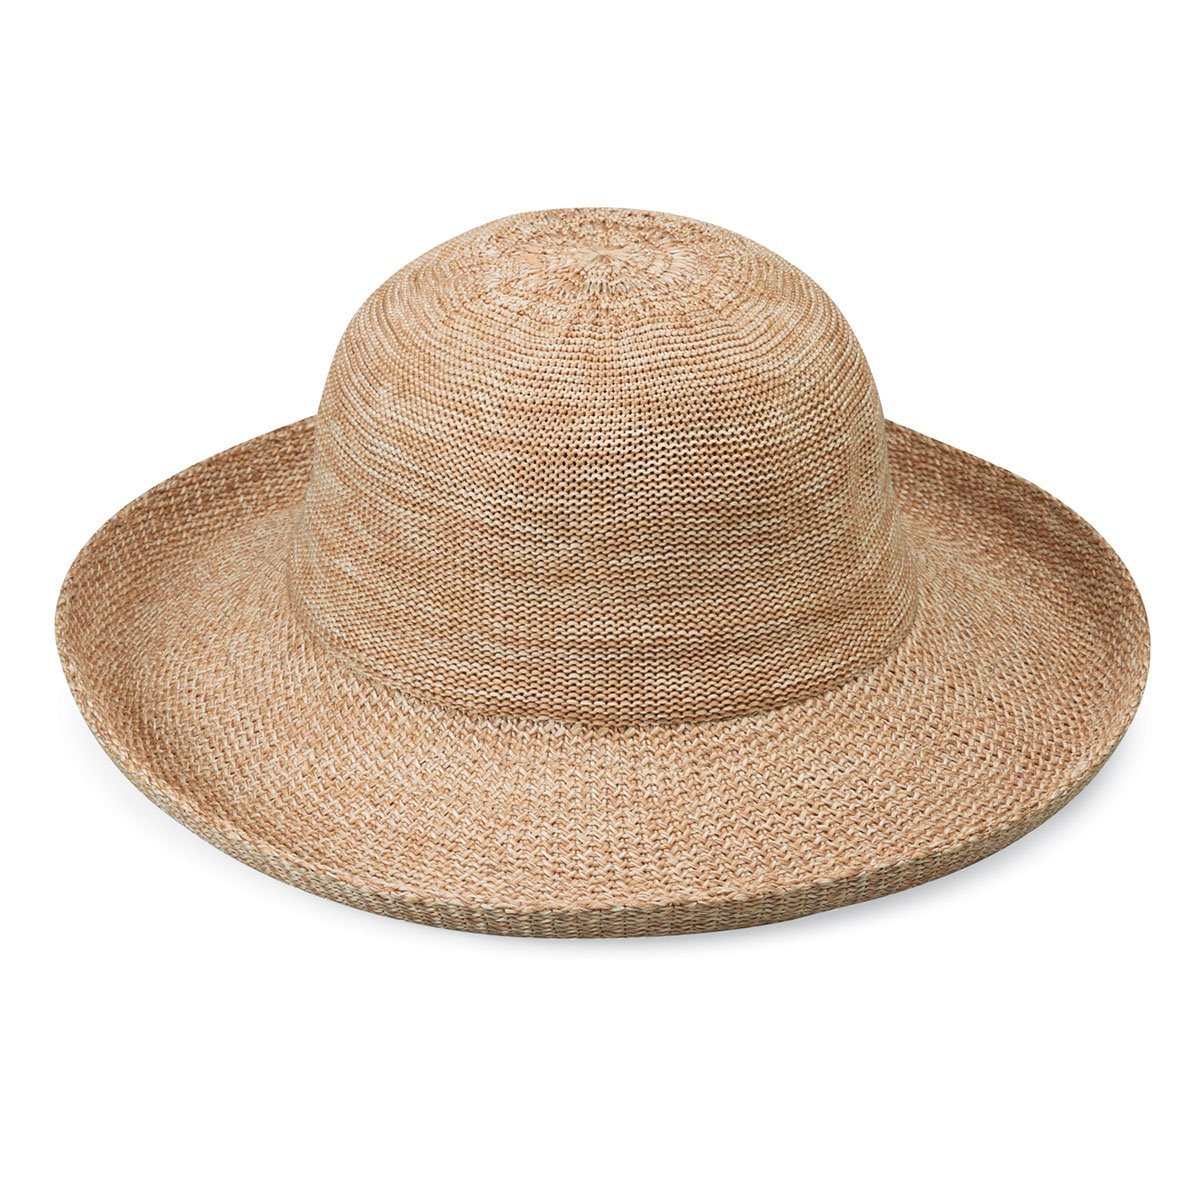 Featuring Ladies' Adjustable Big Wide Brim Style Victoria poly straw Sun Hat in Mixed Camel from Wallaroo